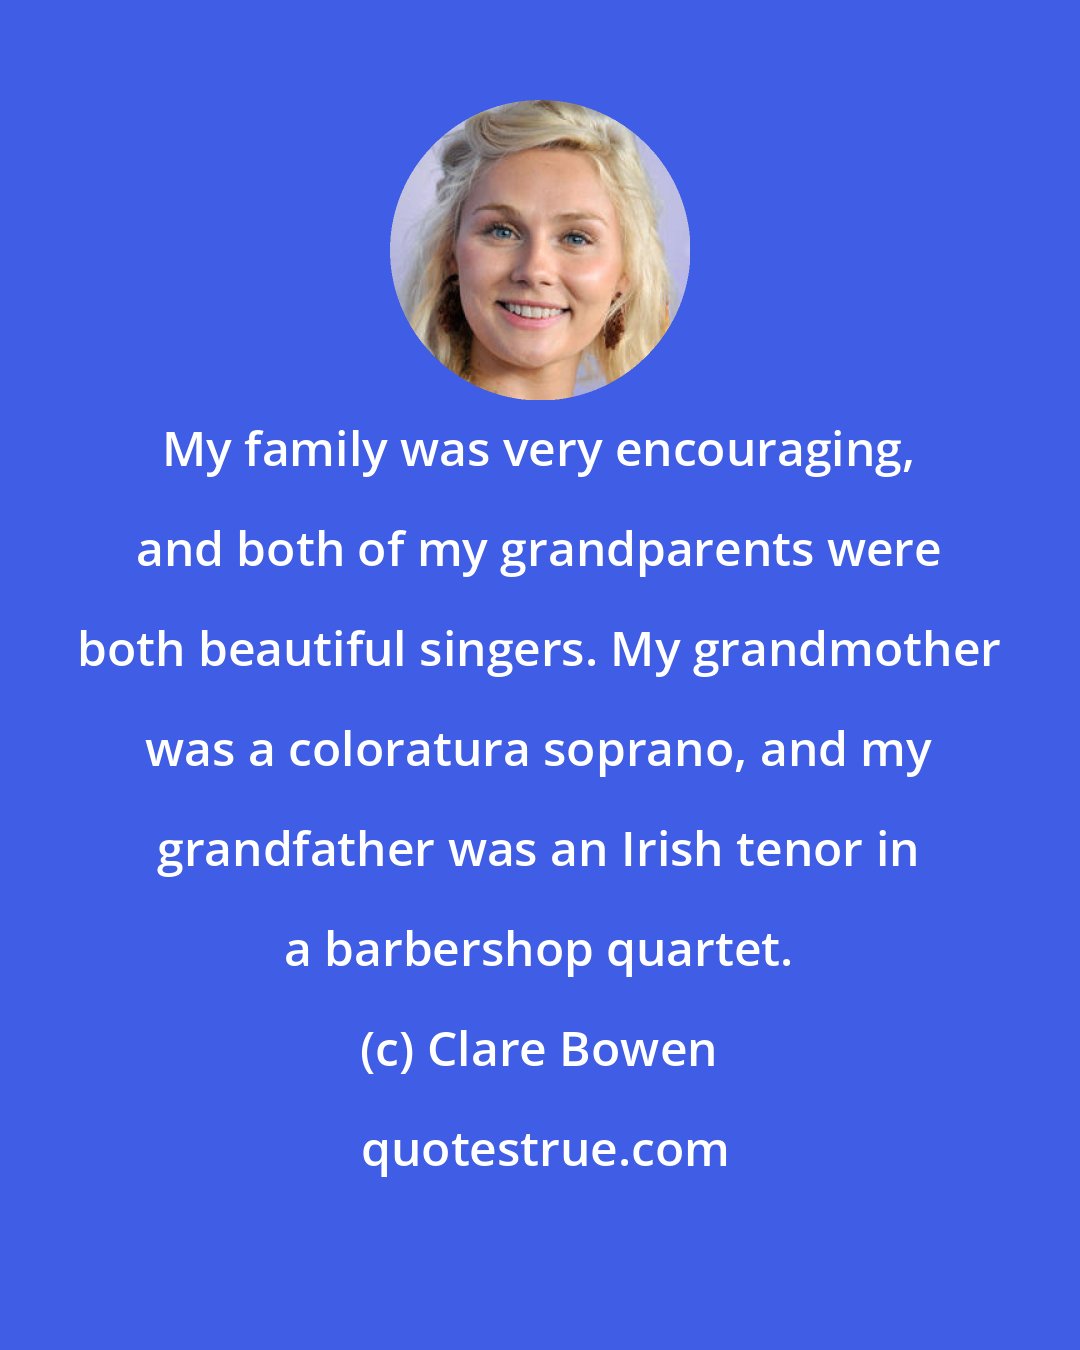 Clare Bowen: My family was very encouraging, and both of my grandparents were both beautiful singers. My grandmother was a coloratura soprano, and my grandfather was an Irish tenor in a barbershop quartet.